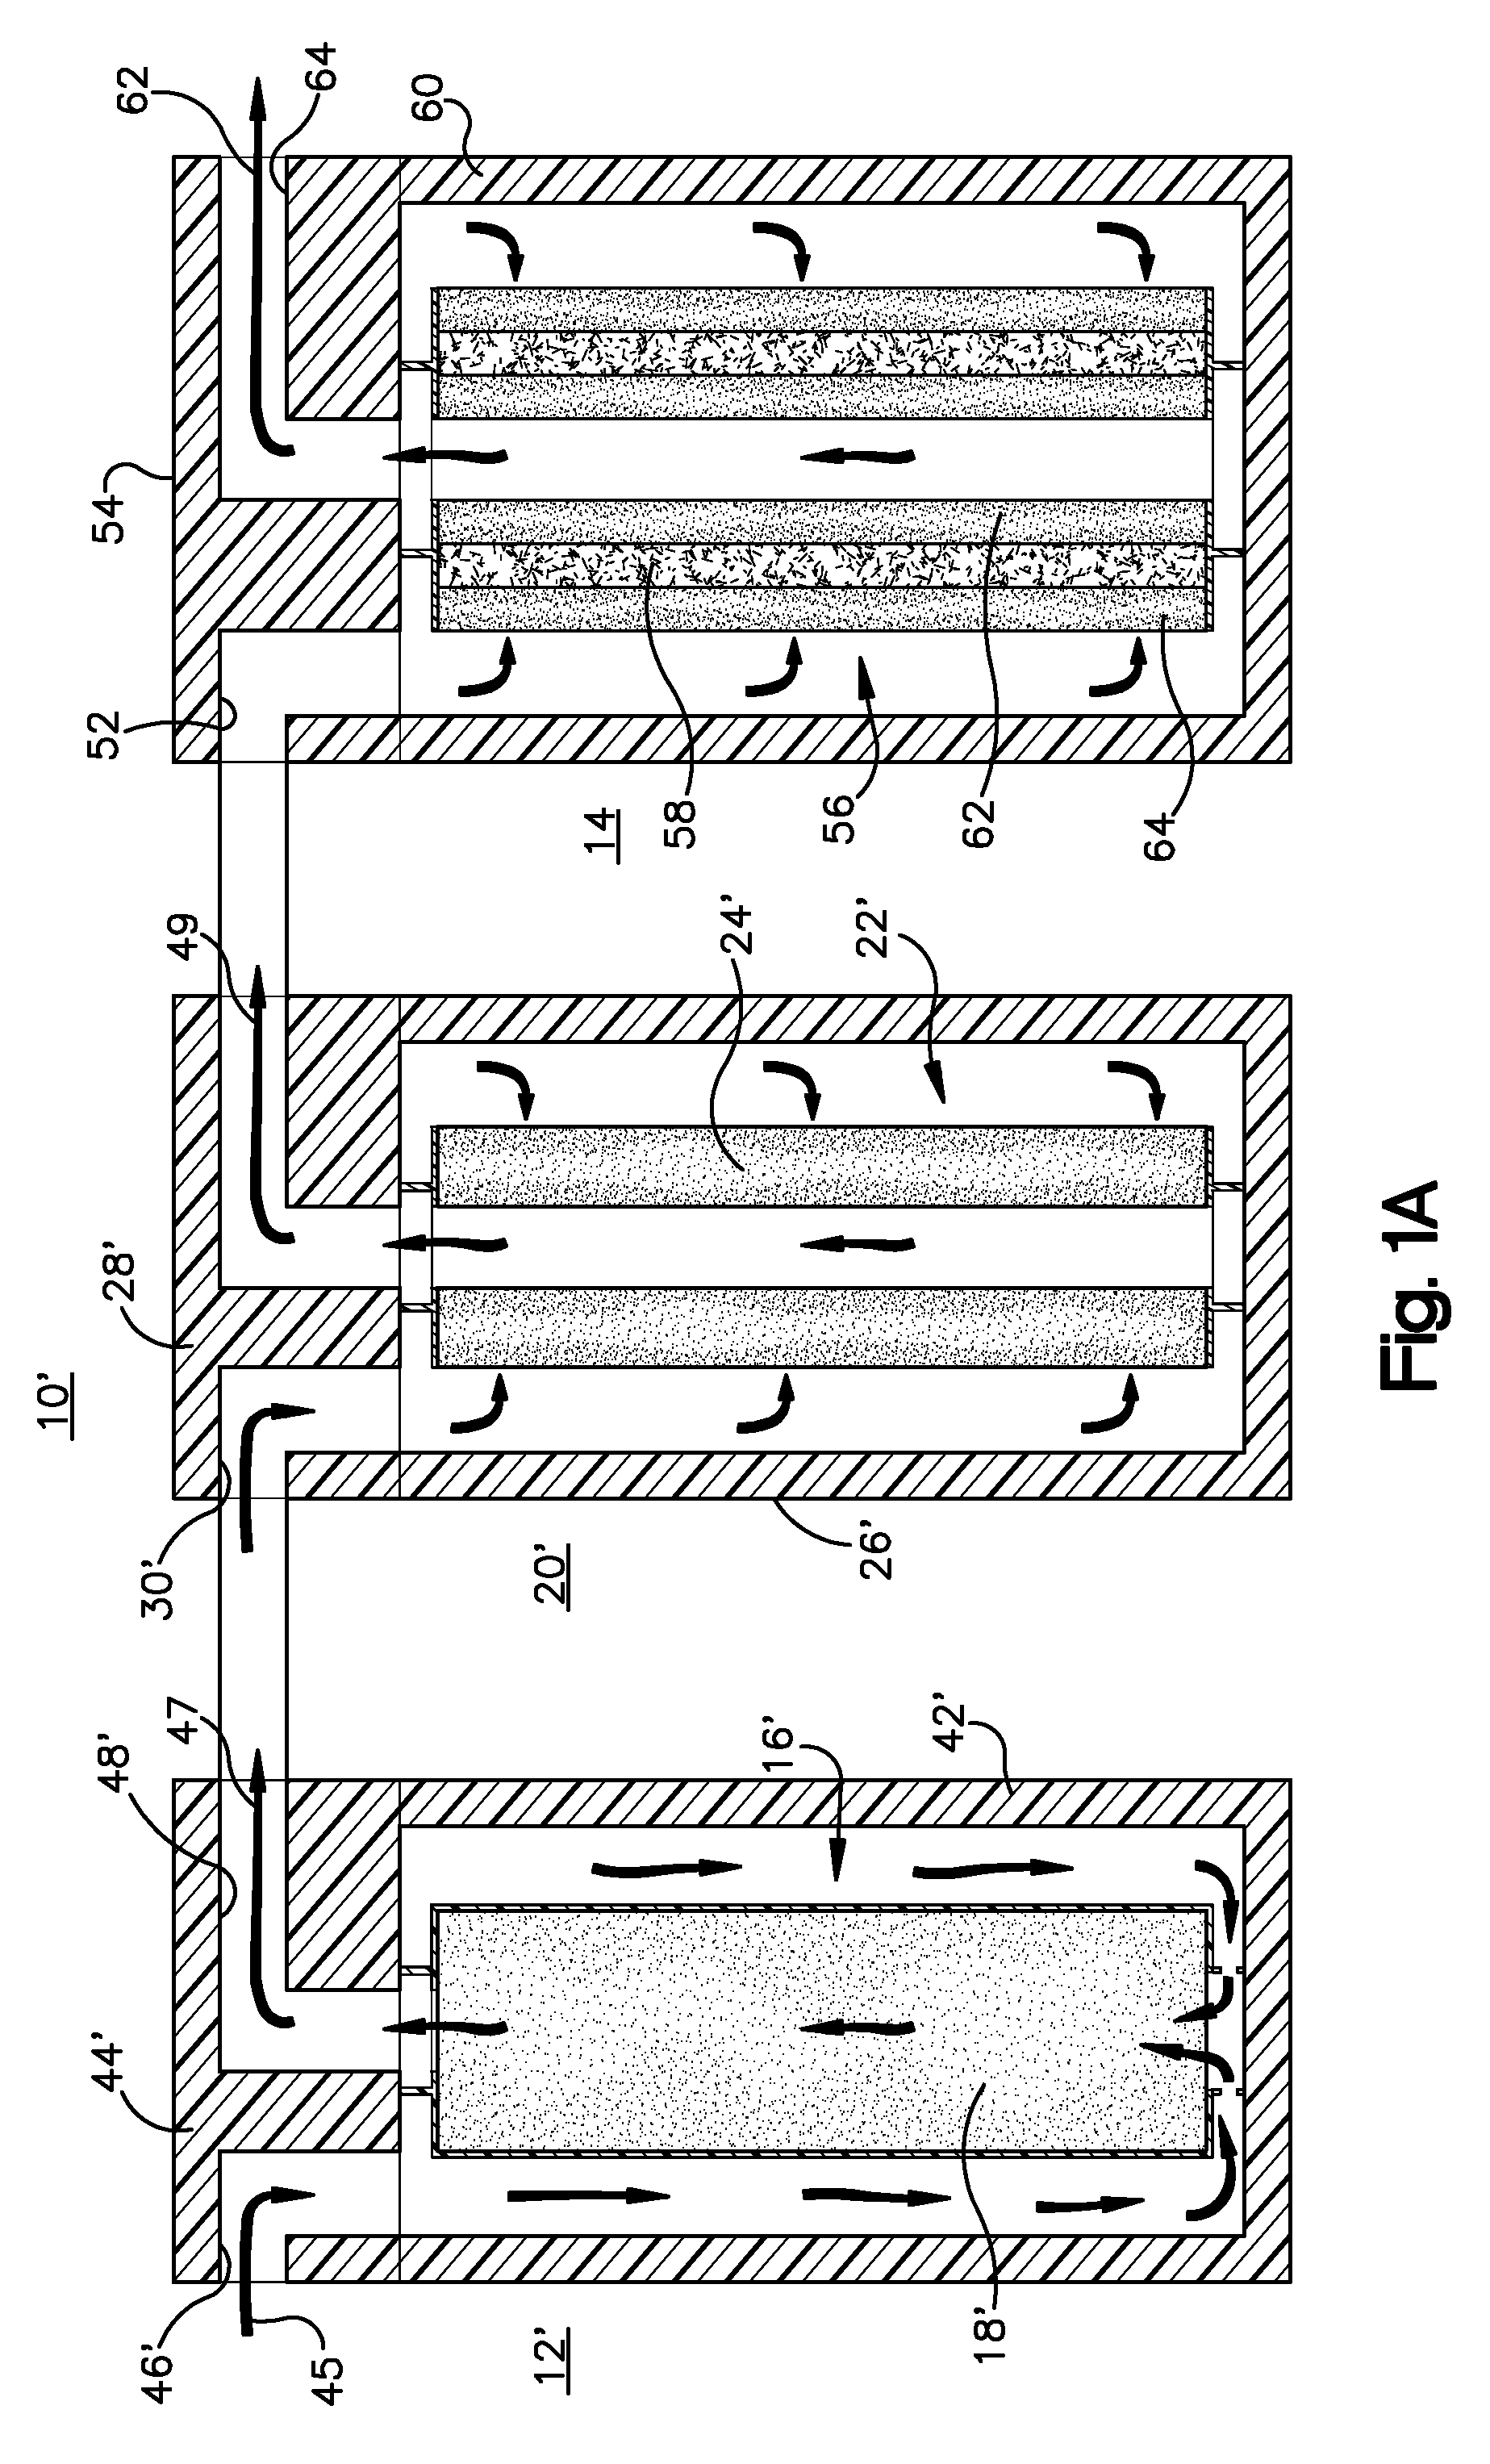 Treating liquids with pH adjuster-based system